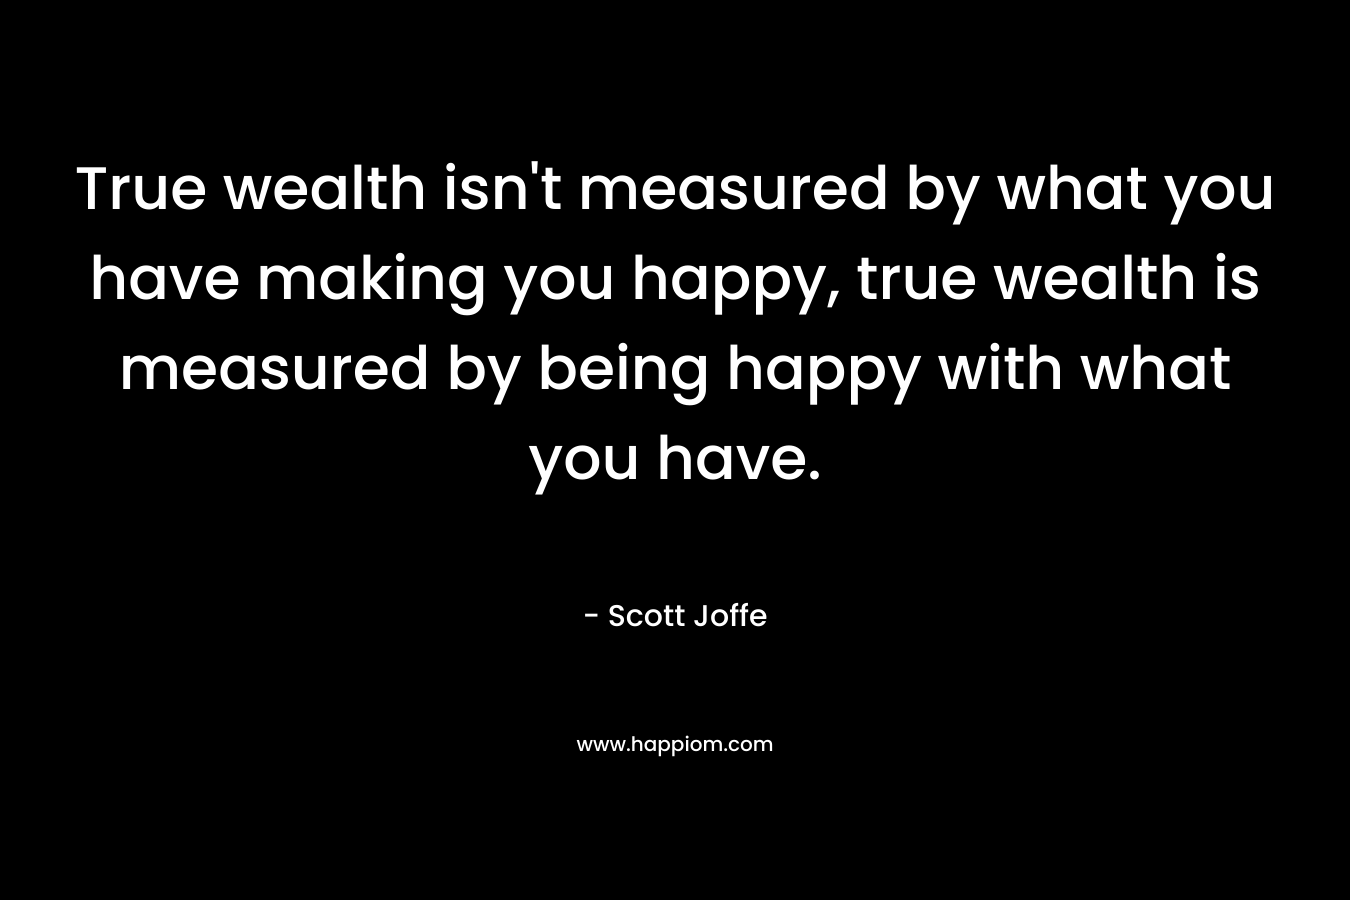 True wealth isn't measured by what you have making you happy, true wealth is measured by being happy with what you have.